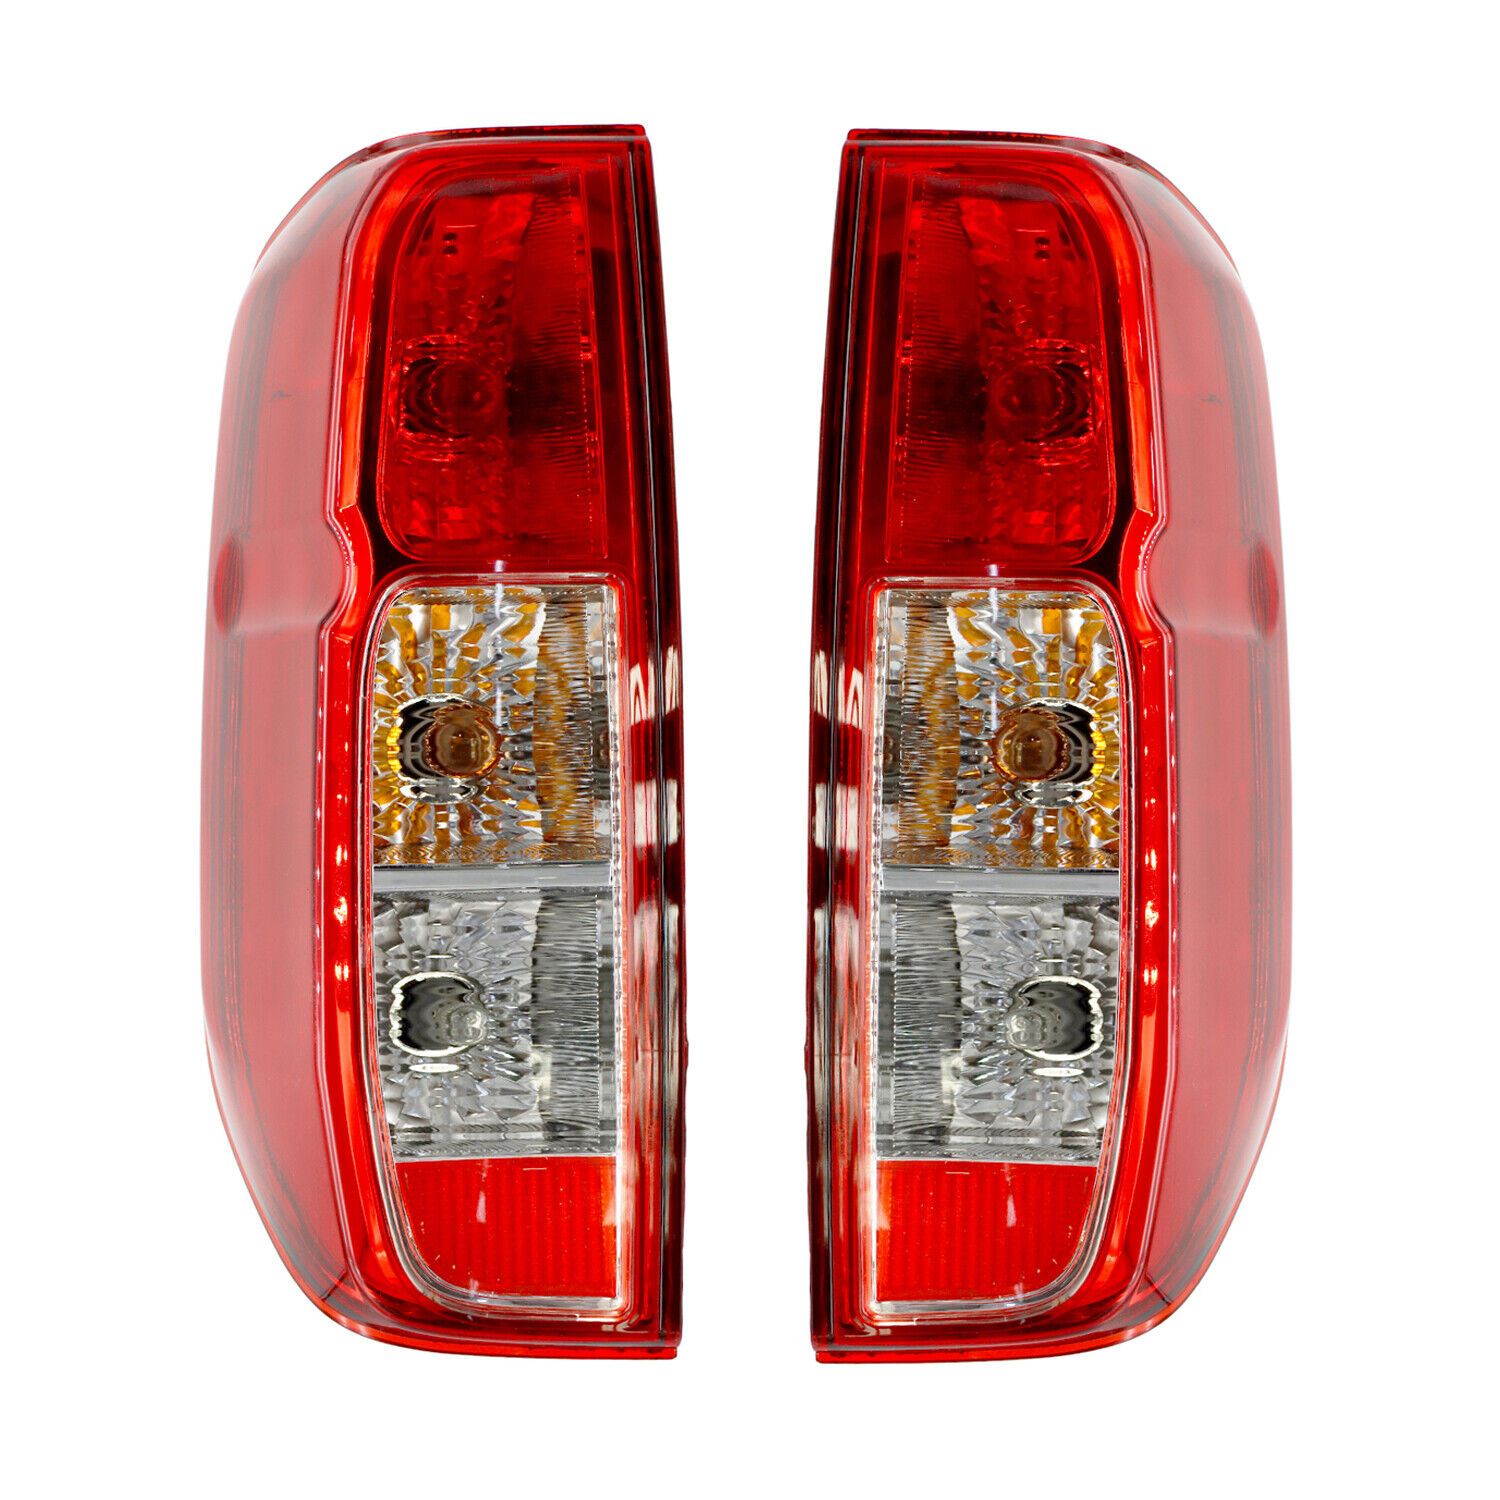 Tail Light Assembly For Nissan Frontier 2005-2015 Rear Brake Lamp with BULB Pair